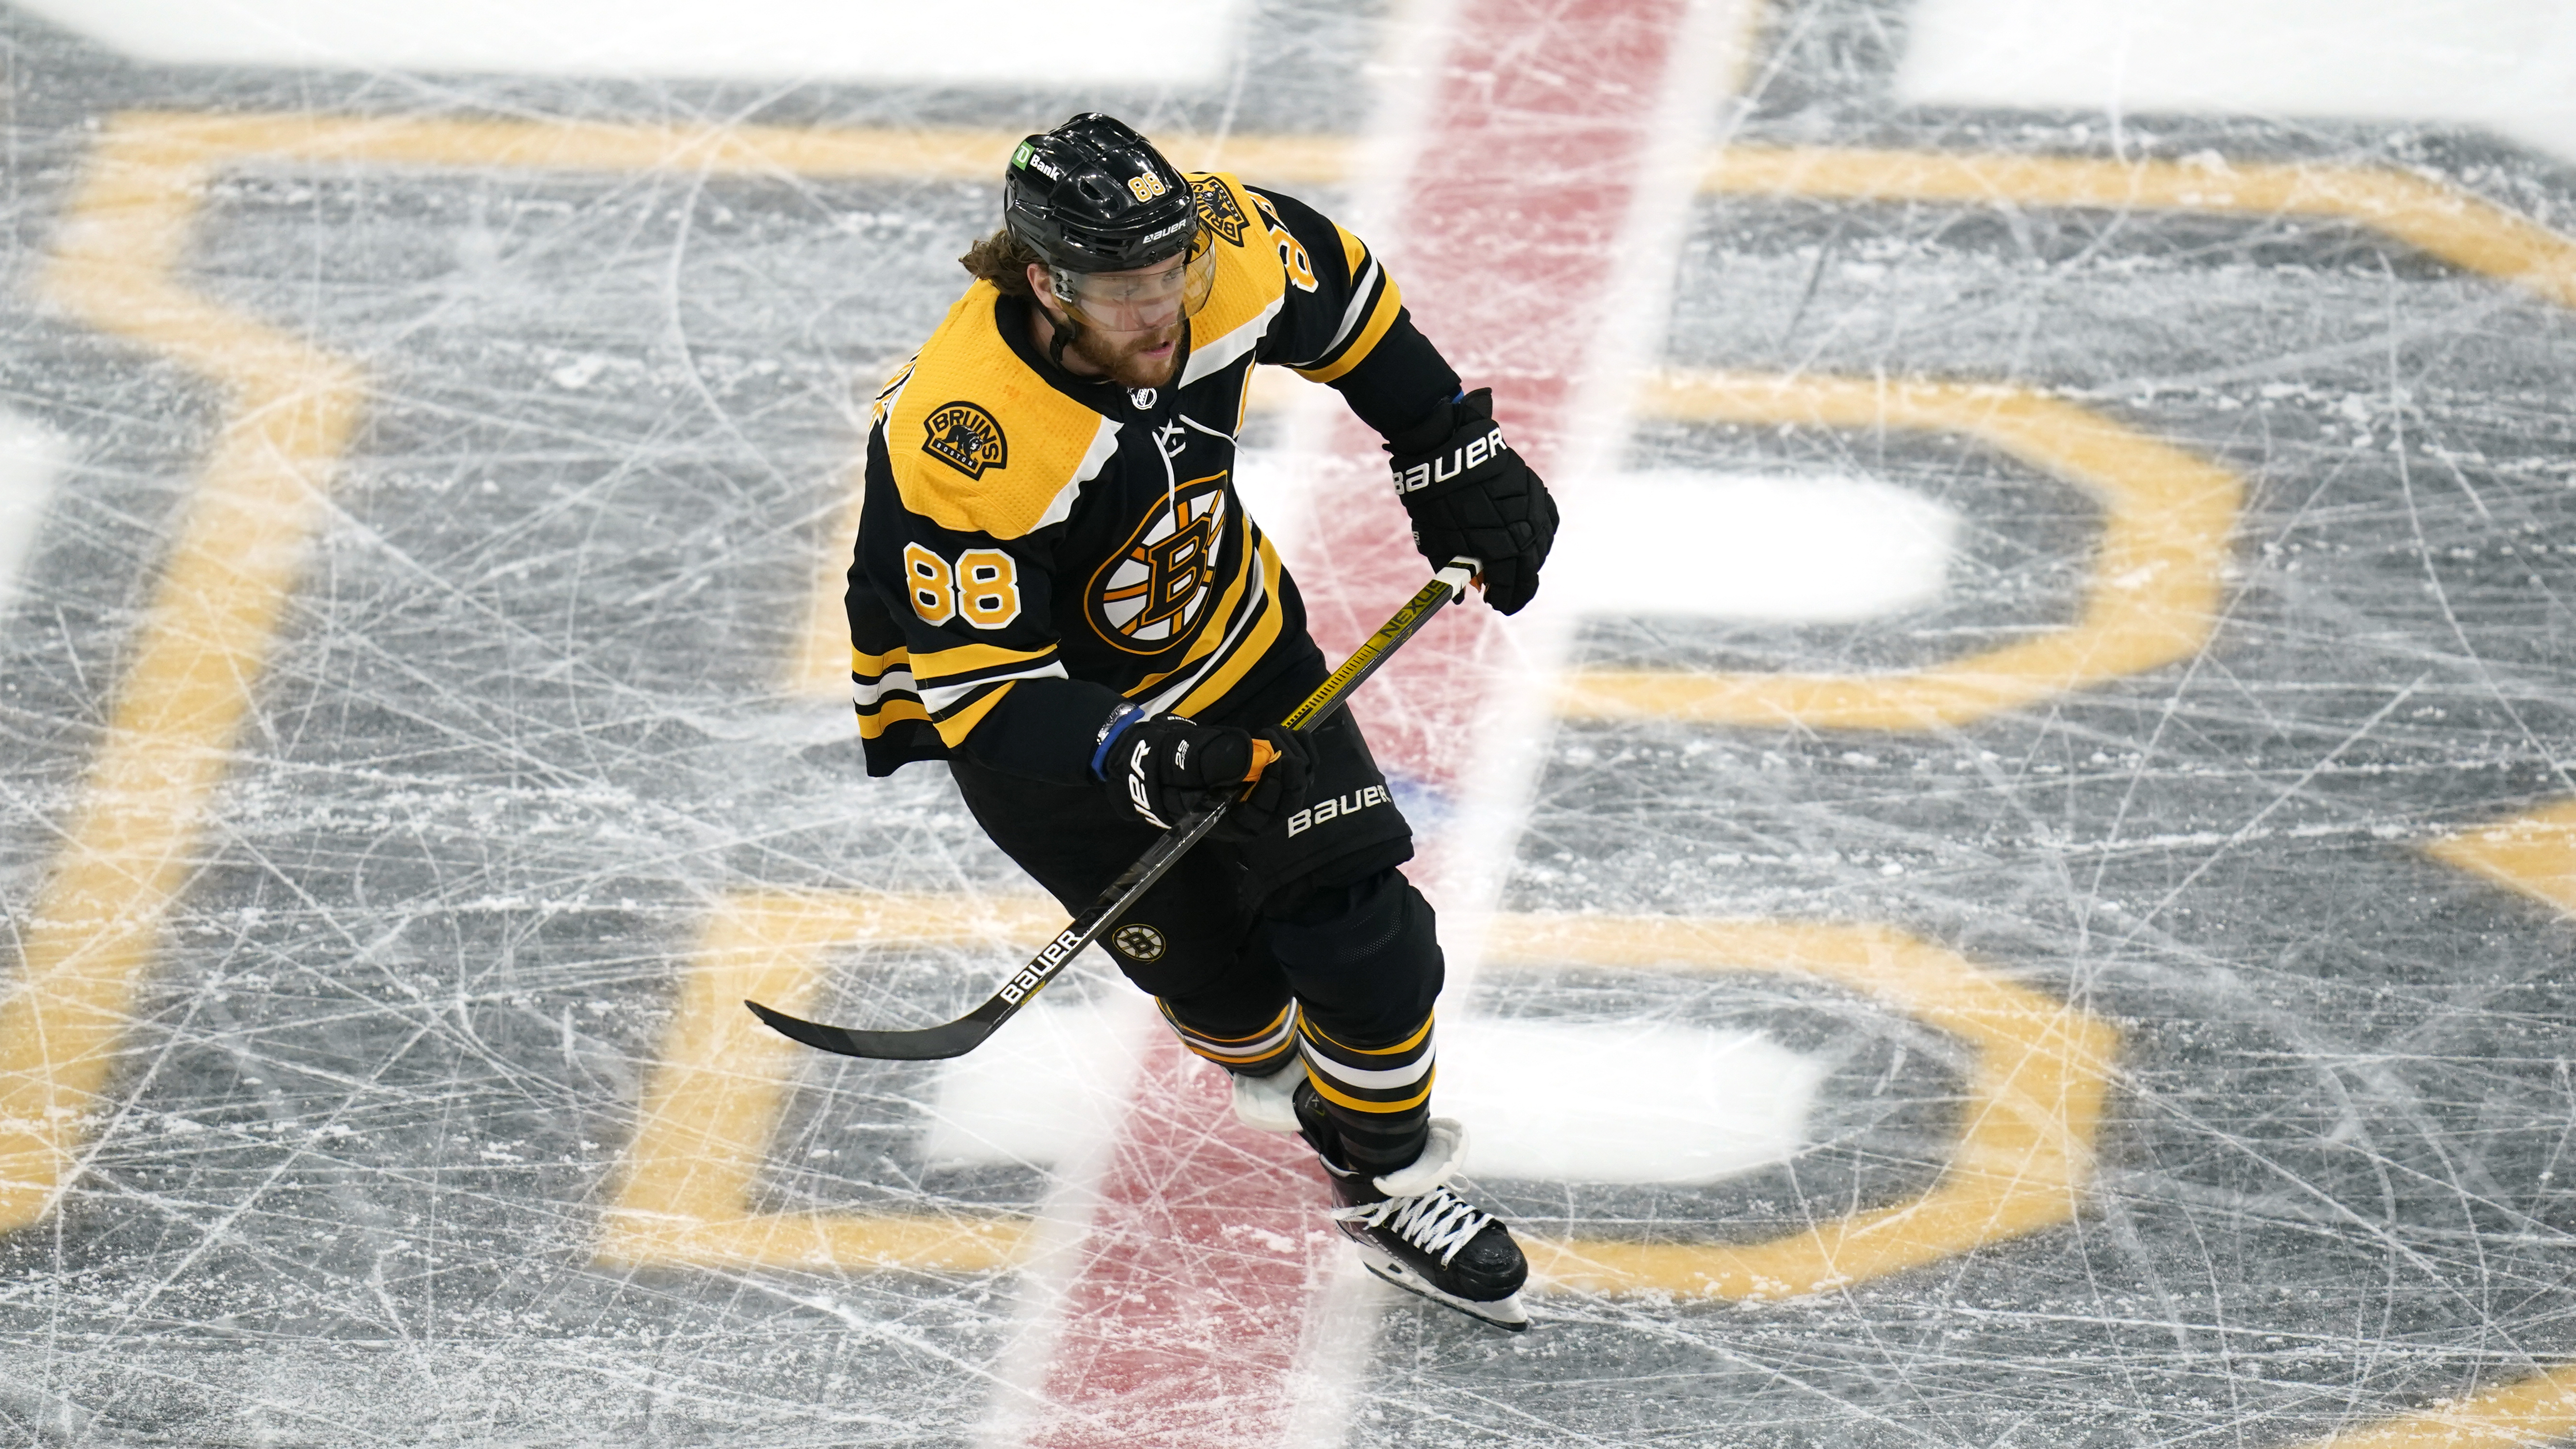 Bruins GM: 'No timetable' for new David Pastrnak contract